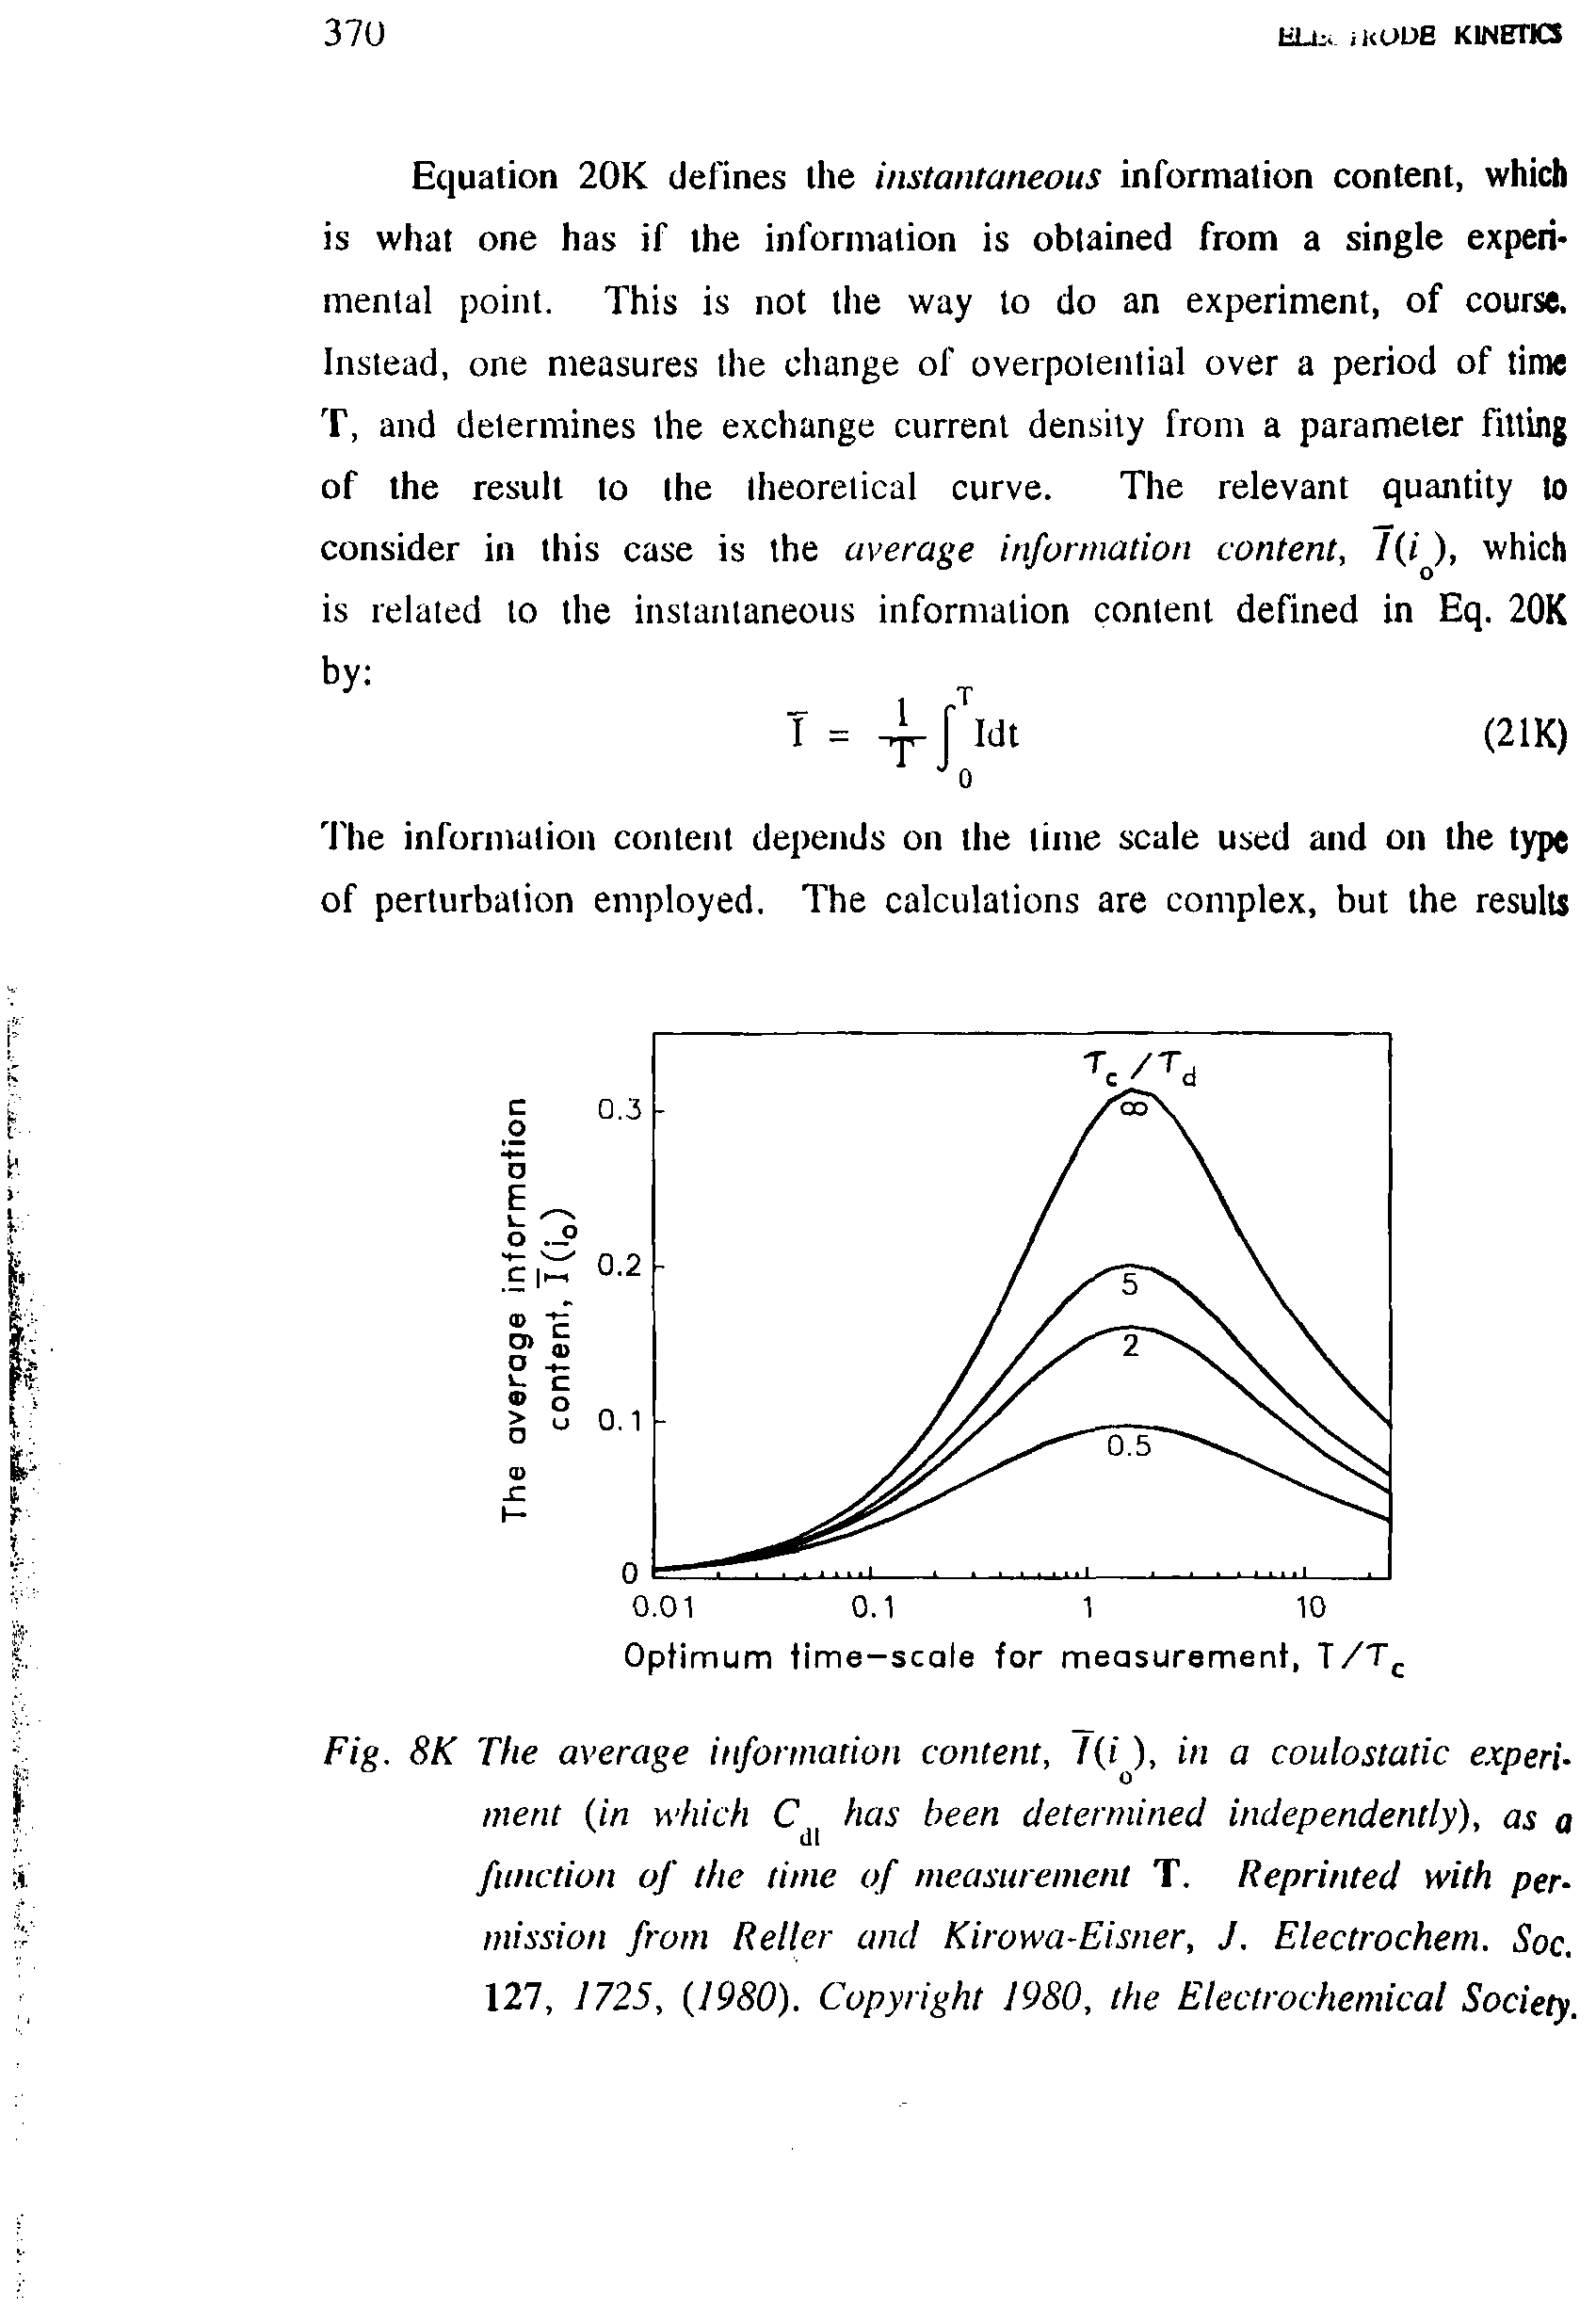 Fig. 8K The average information content, f(0, in a coulostatic experiment (in which has been determined independently), as a function of the time of measurement T. Reprinted with permission from Relief and Kirowa-Eisner, J. Electrochem. Soc. 127, J725, (1980). Copyright 1980, the Electrochemical Society.